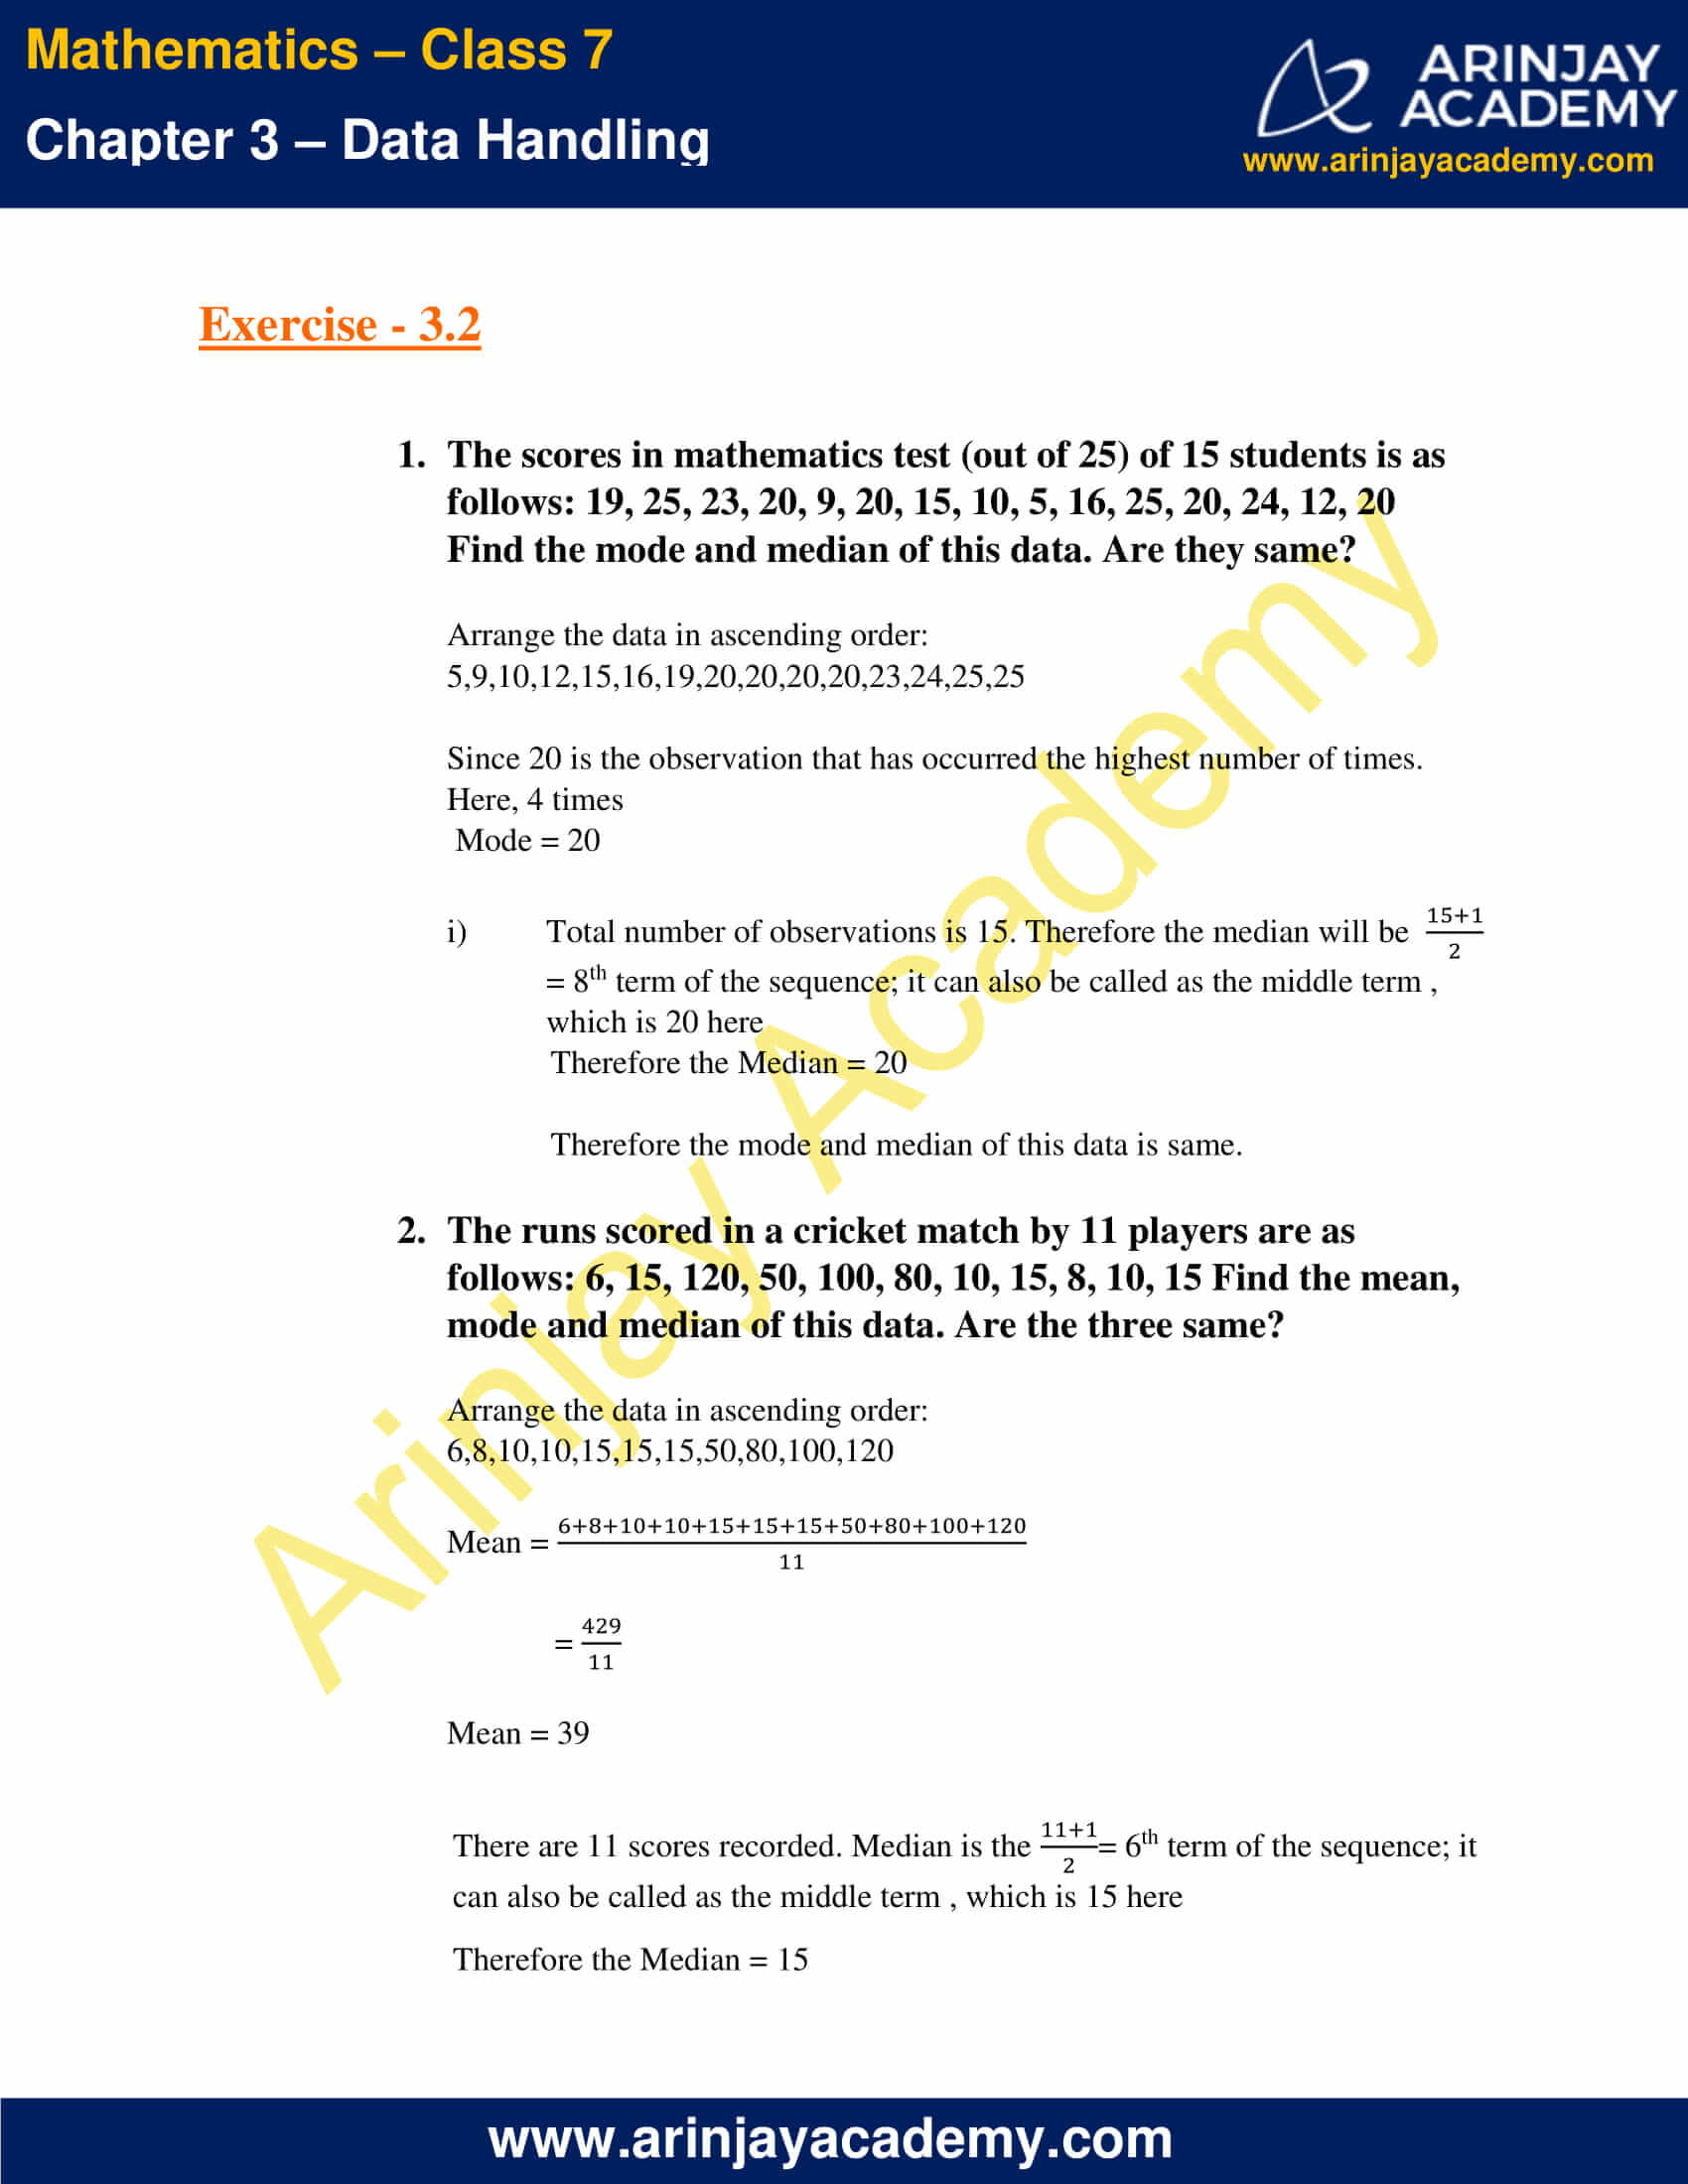 NCERT Solutions for Class 7 Maths Chapter 3 Exercise 3.2 image 1